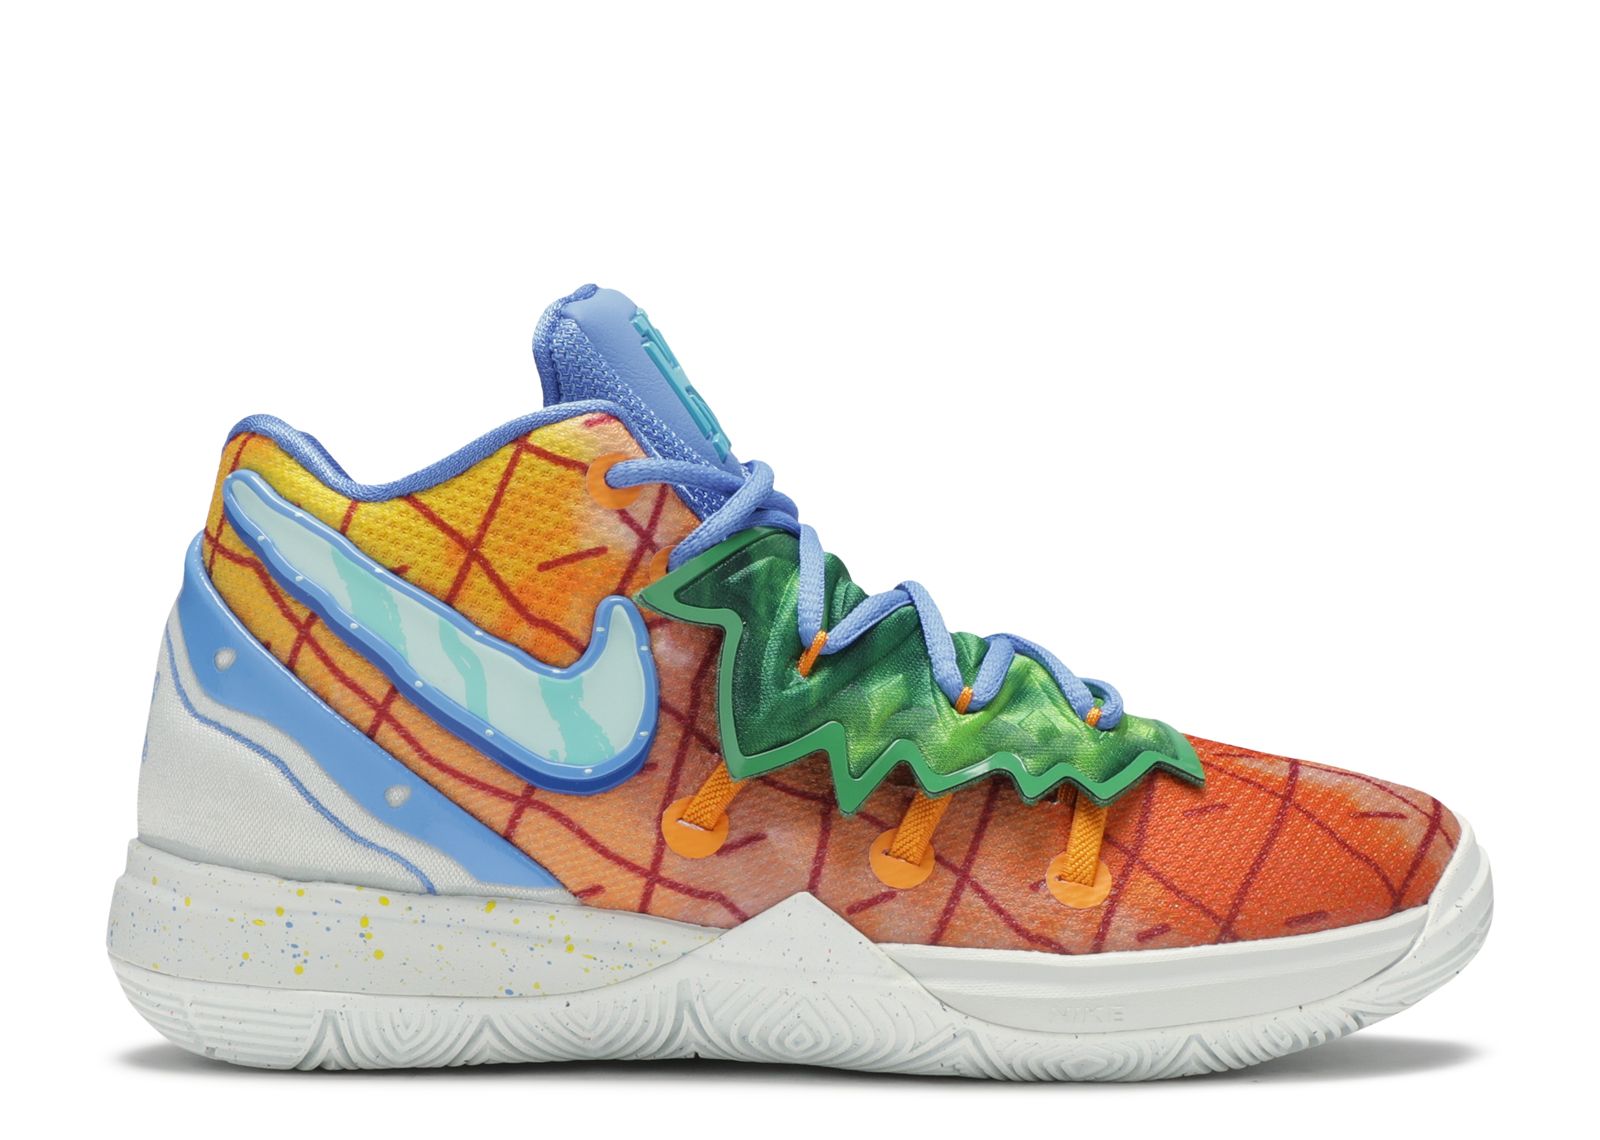 kyrie irving shoes basketball